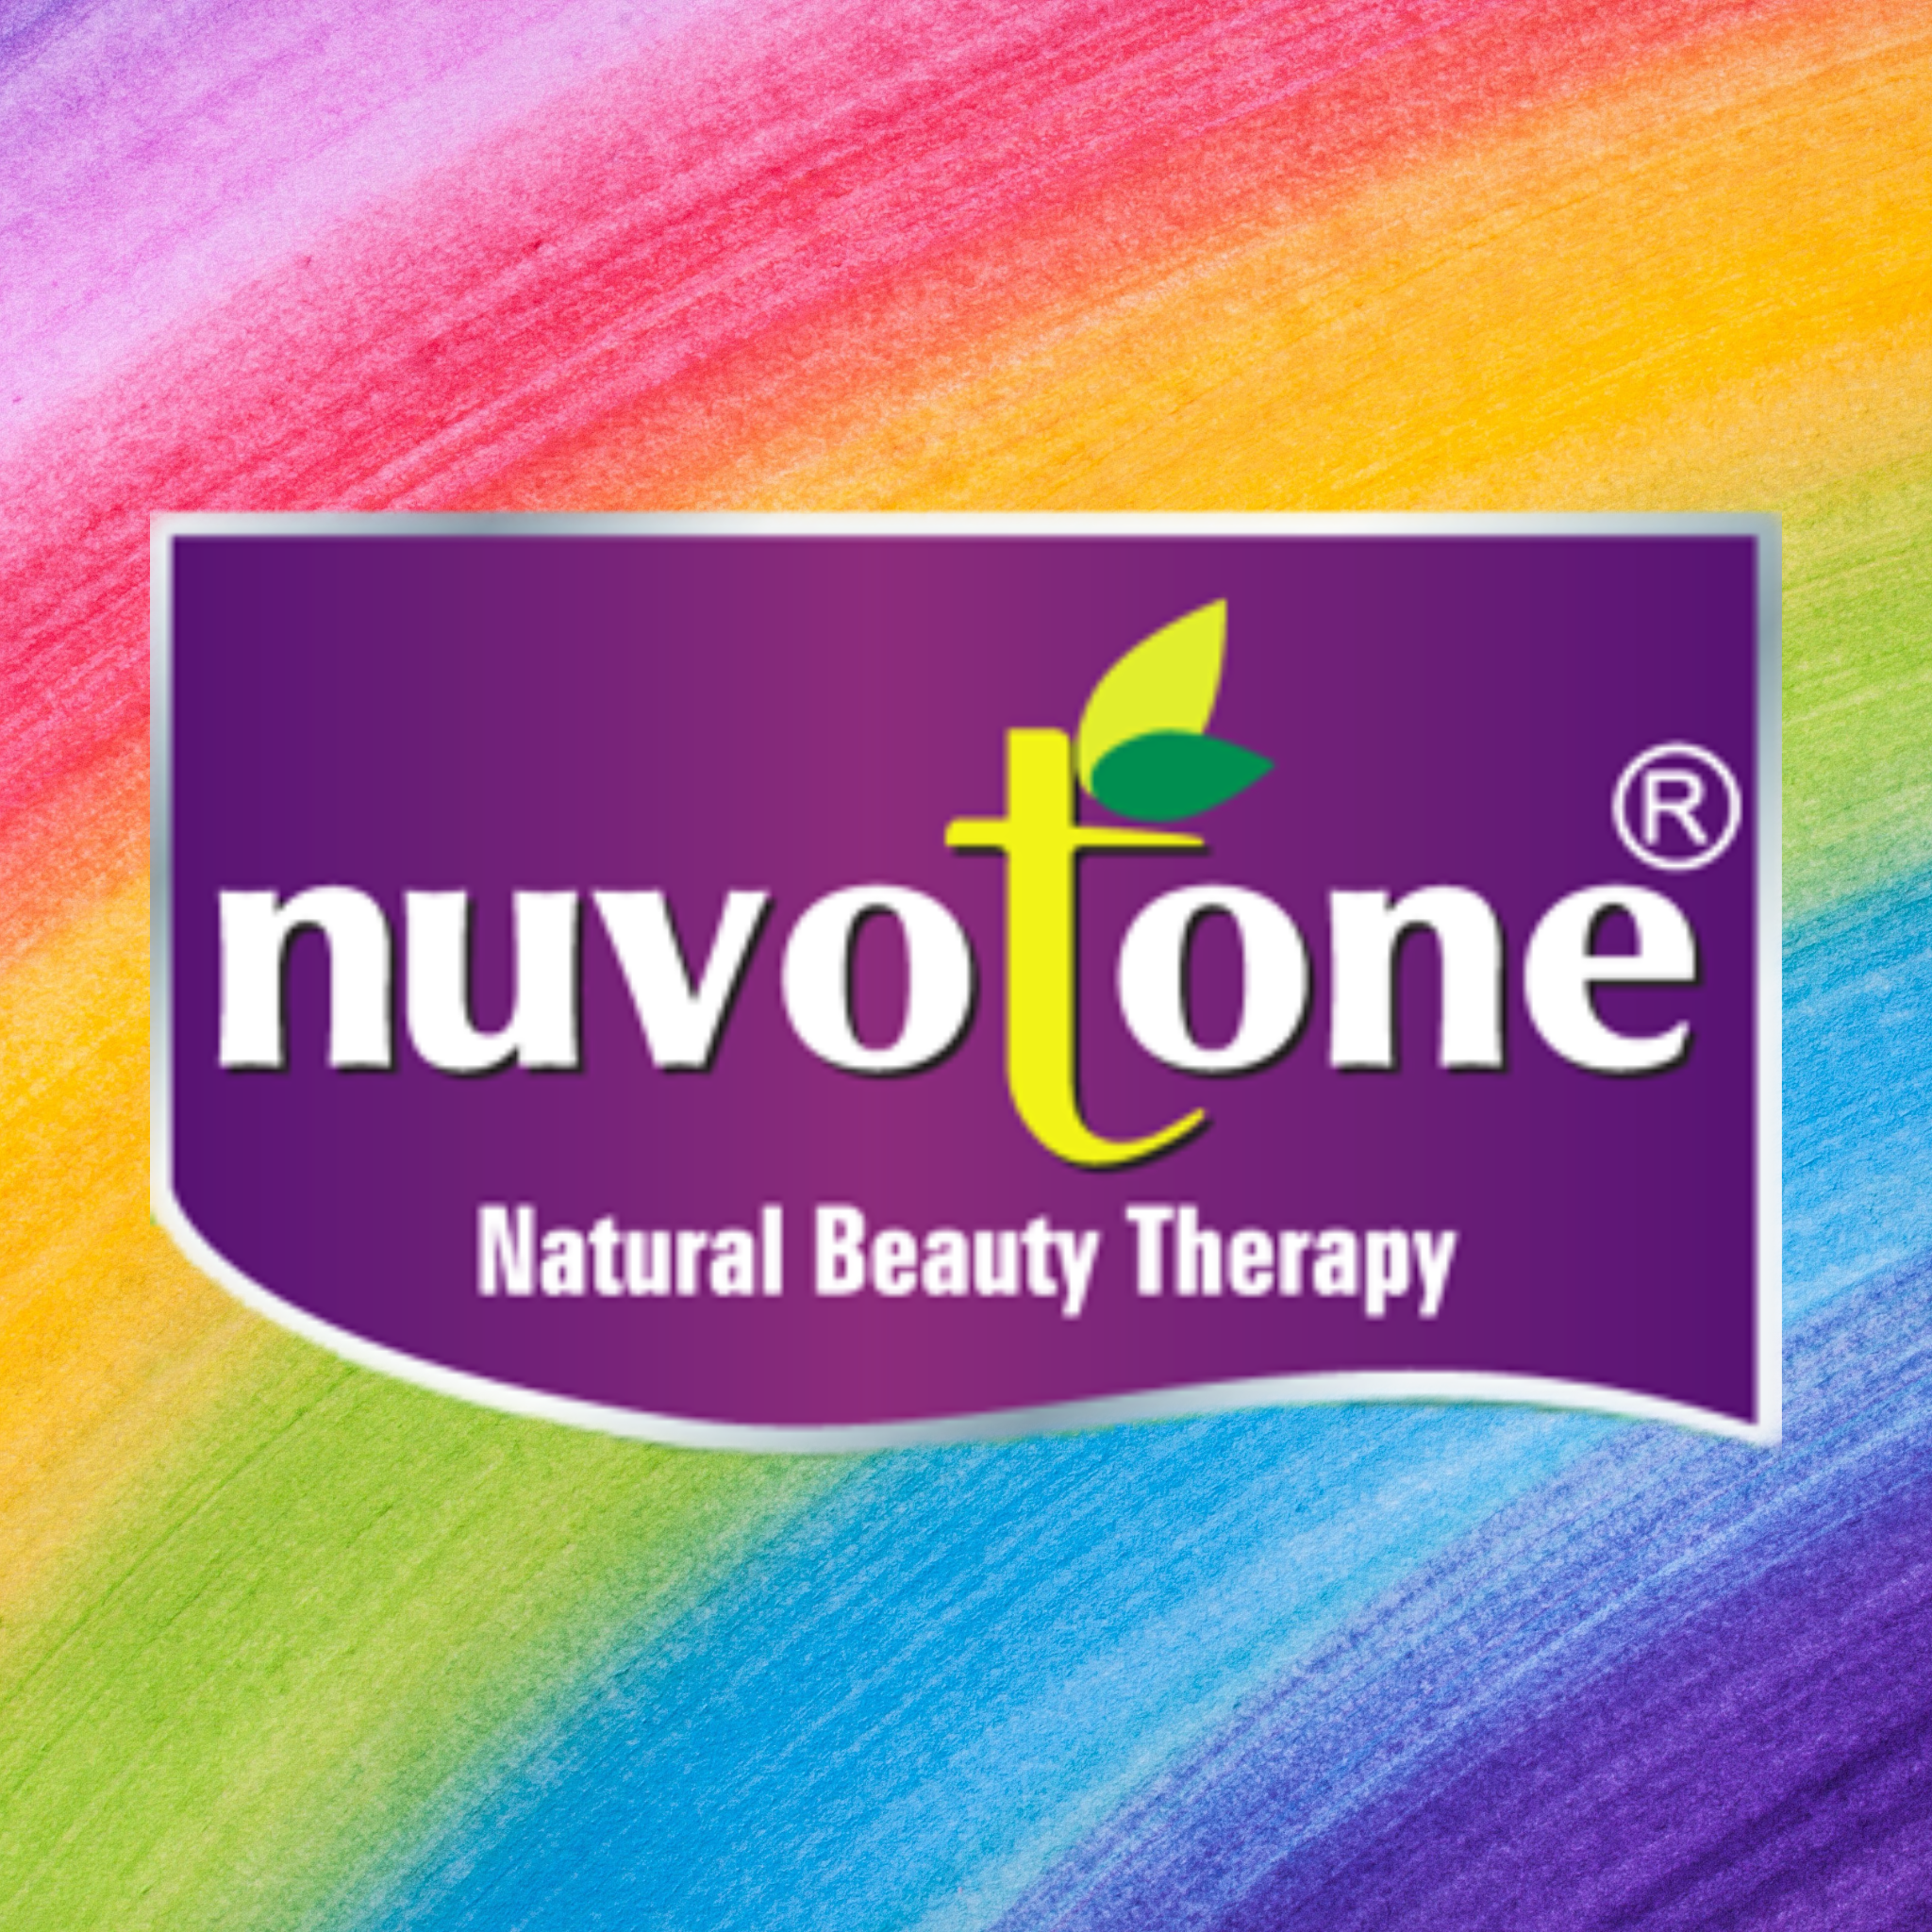 NUVONATURALS PRIVATE LIMITED